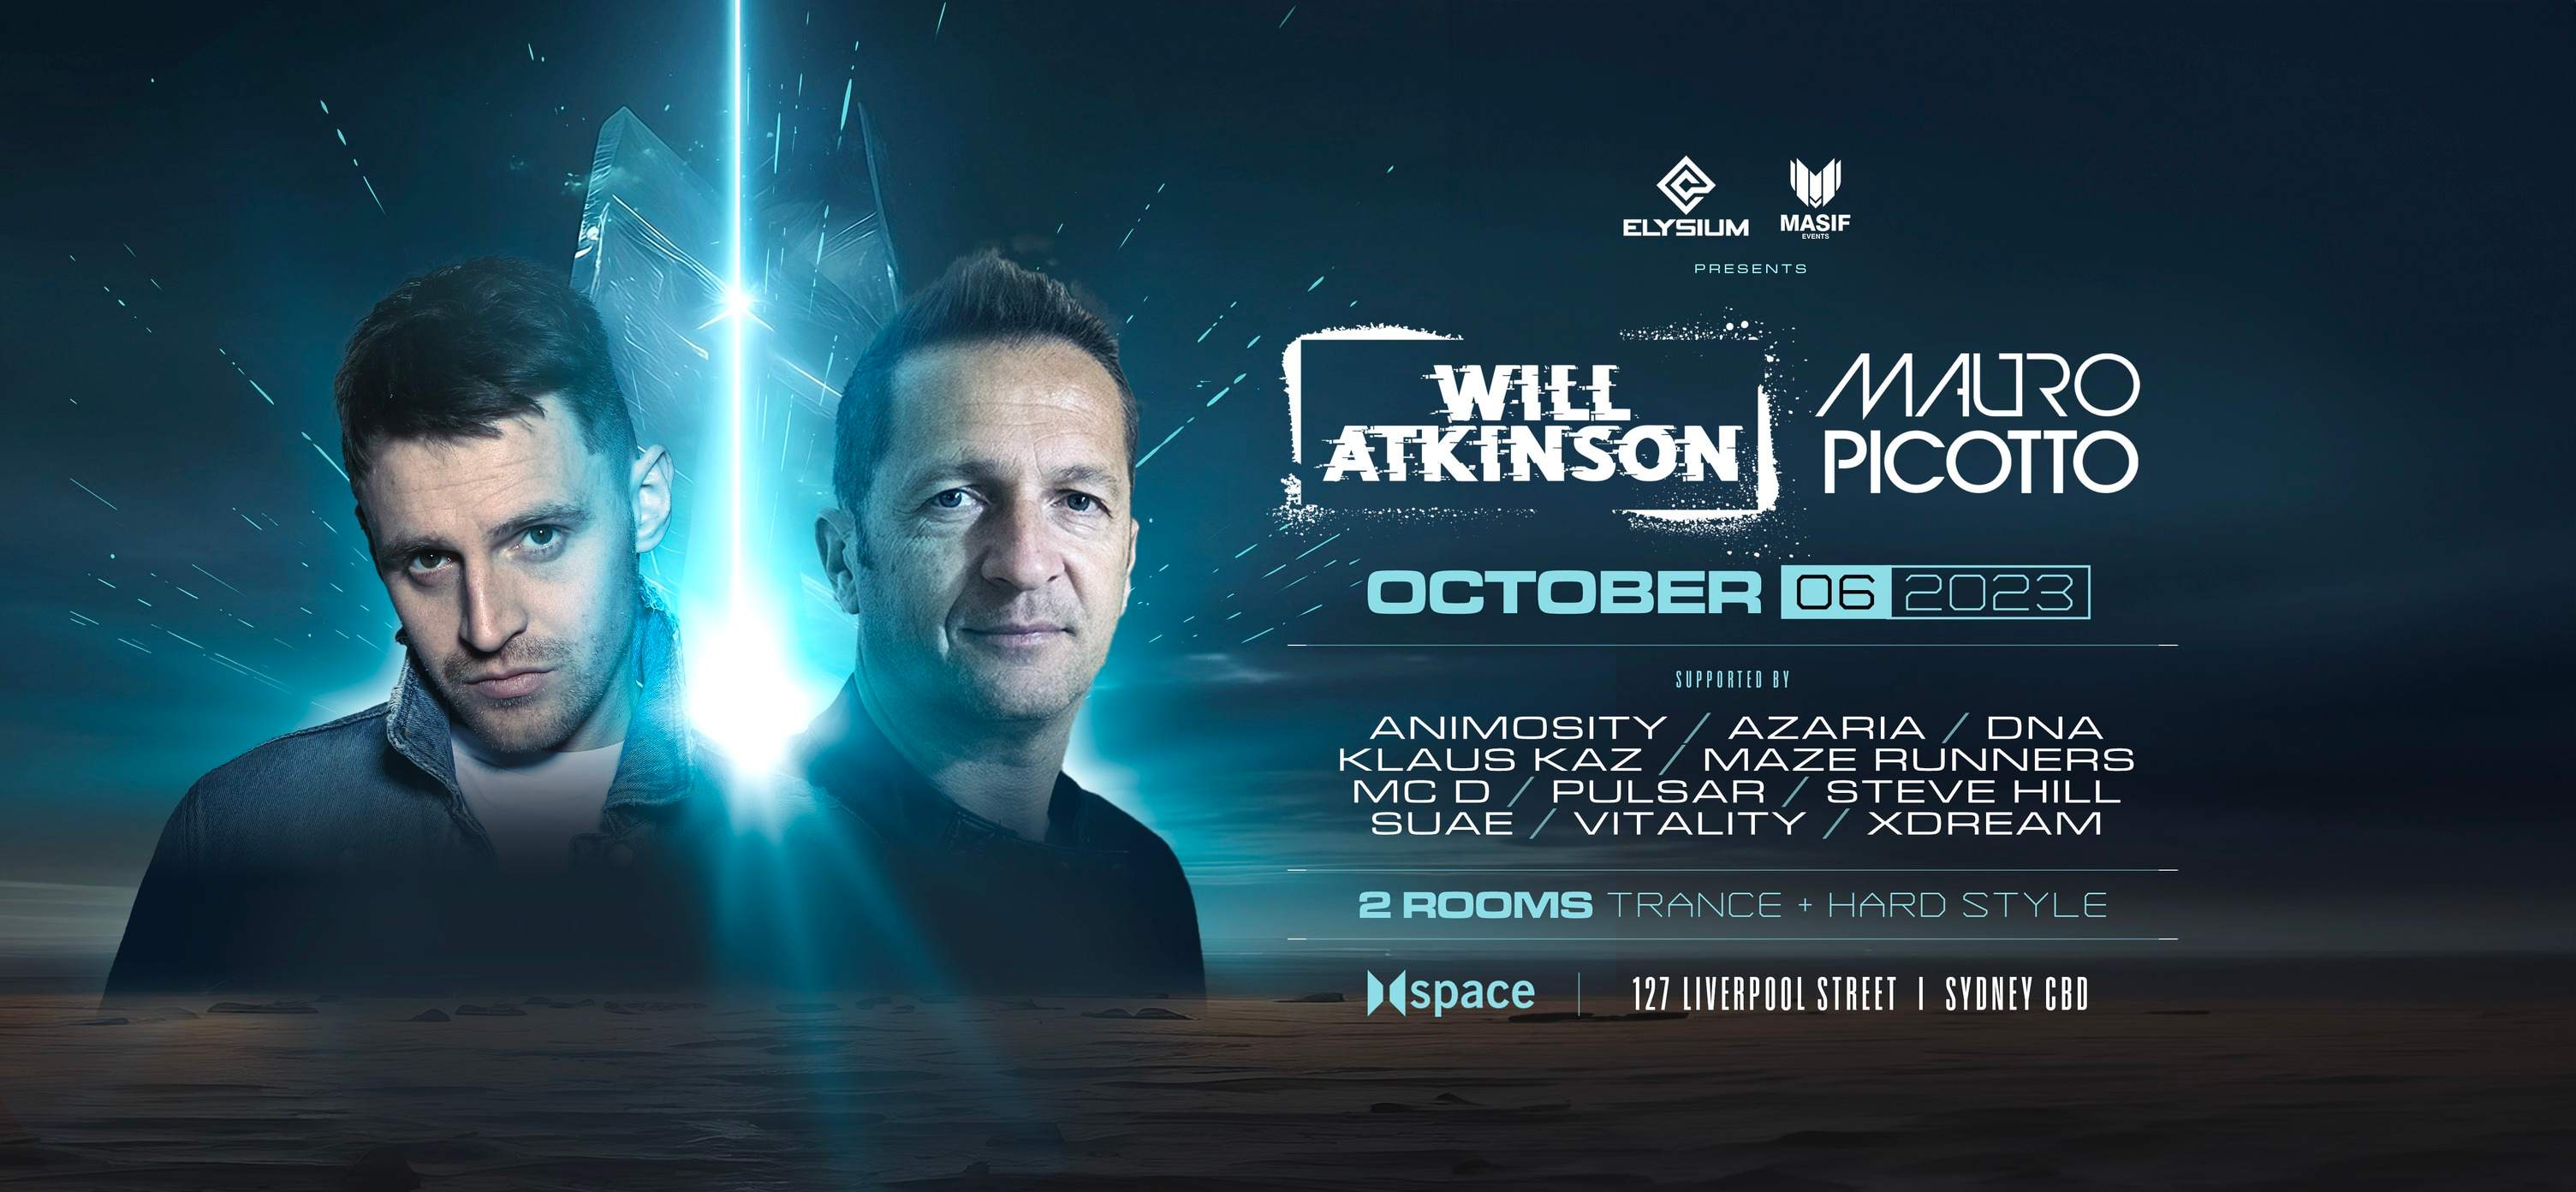 Masif Events and Elysium Presents: WILL ATKINSON - フライヤー表